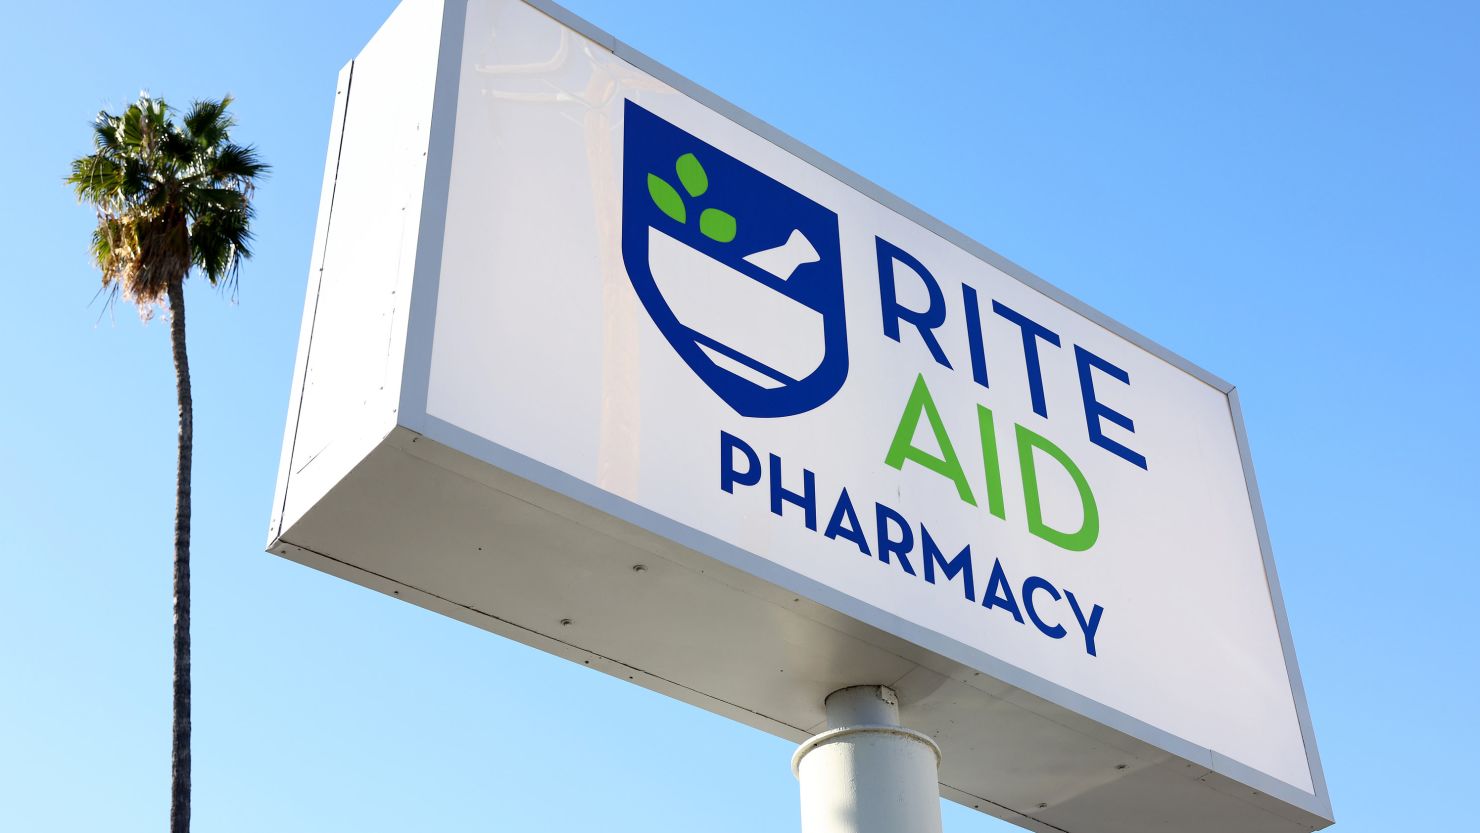 Rite Aid has declared bankruptcy